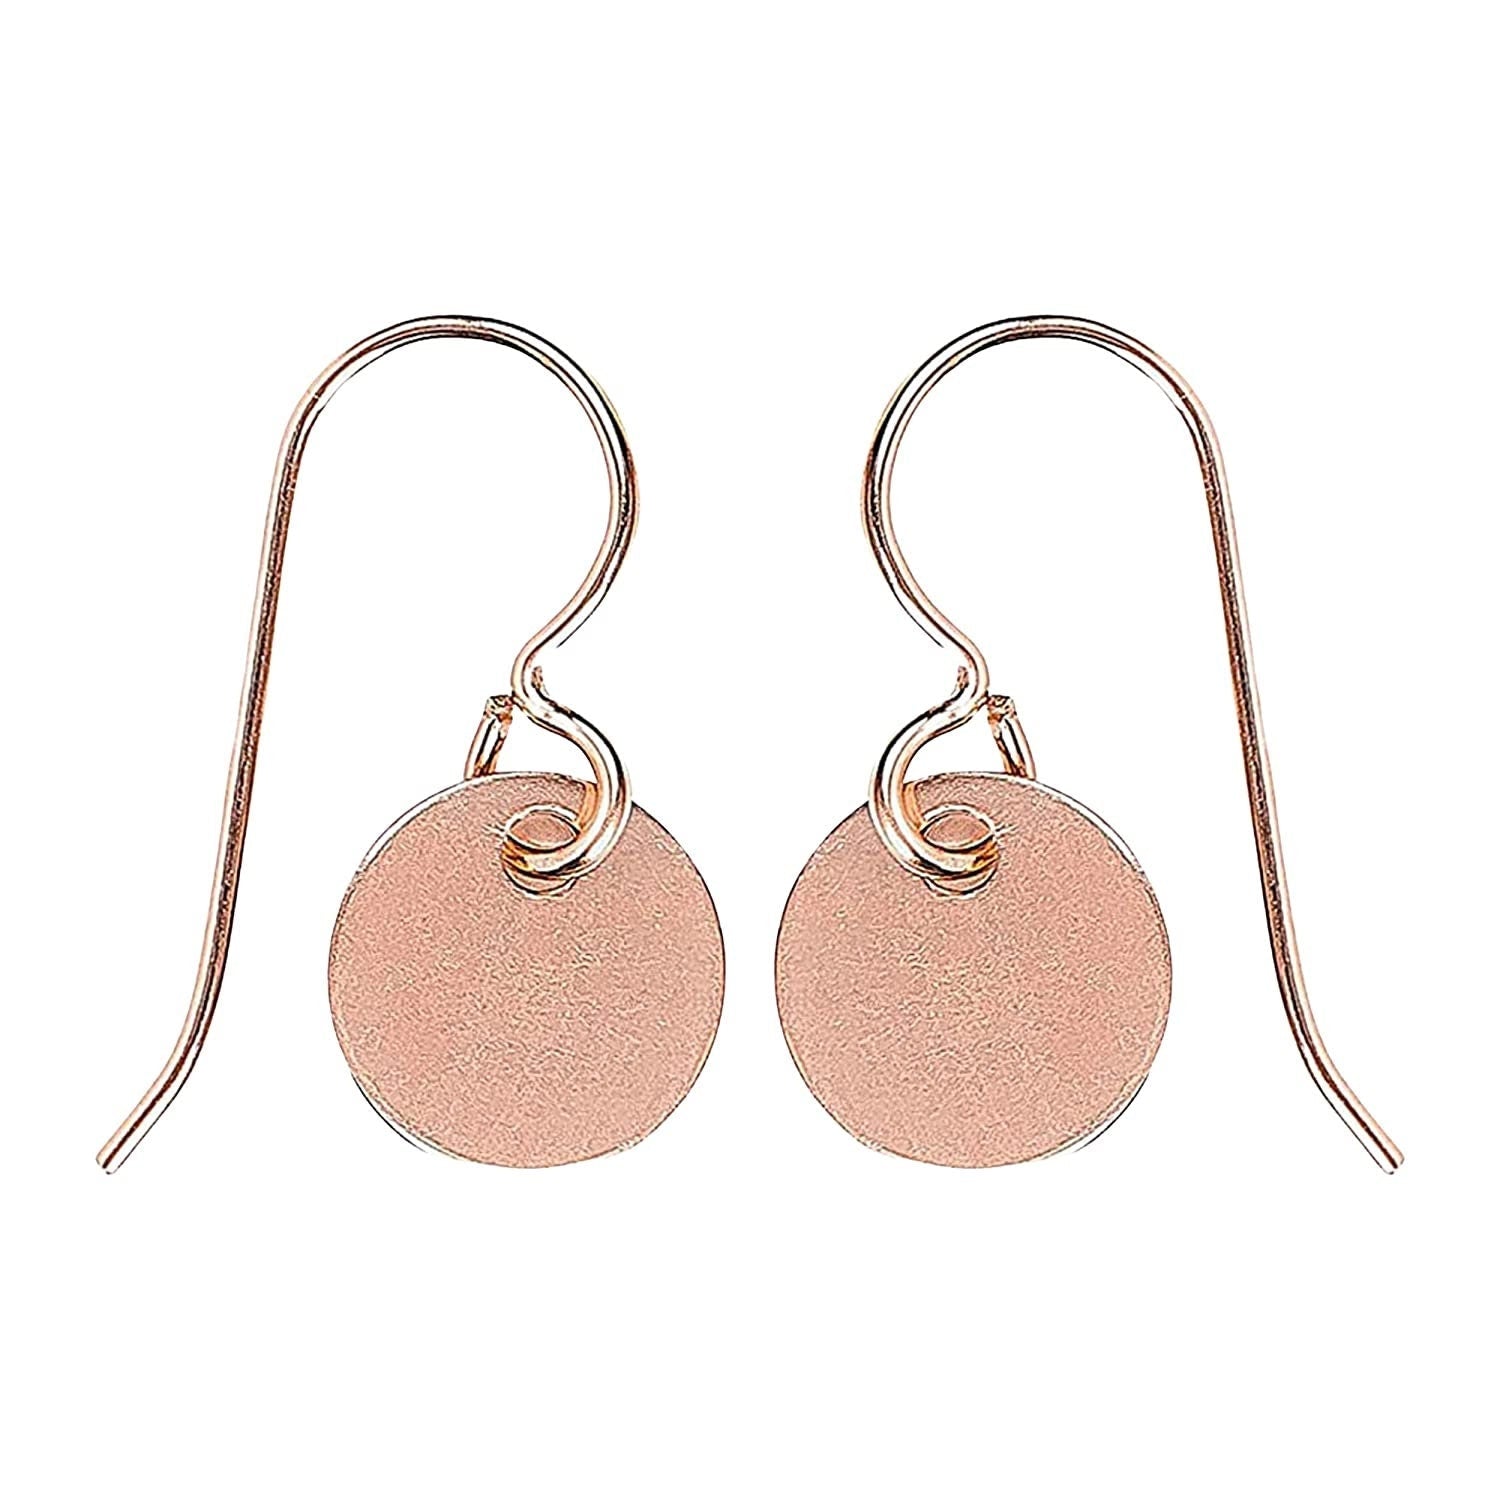 Round Circle Disc Dangle Earrings | Rose Gold - Melanie Golden Jewelry - dangle earrings, drop earrings, earrings, everyday, everyday essentials, minimal, minimal jewelry, rose, rose gold